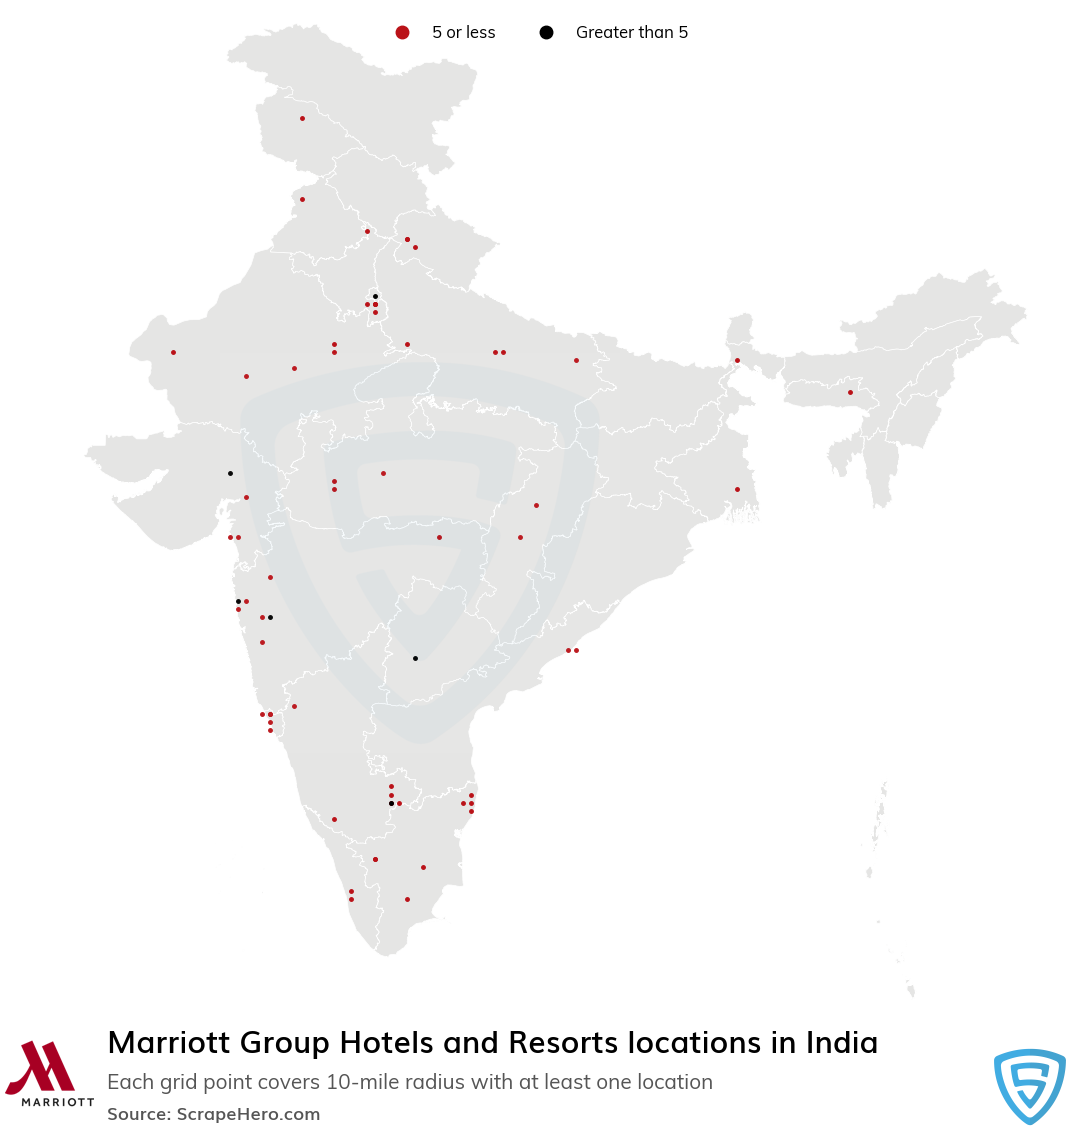 Marriott Group Hotels and Resorts locations